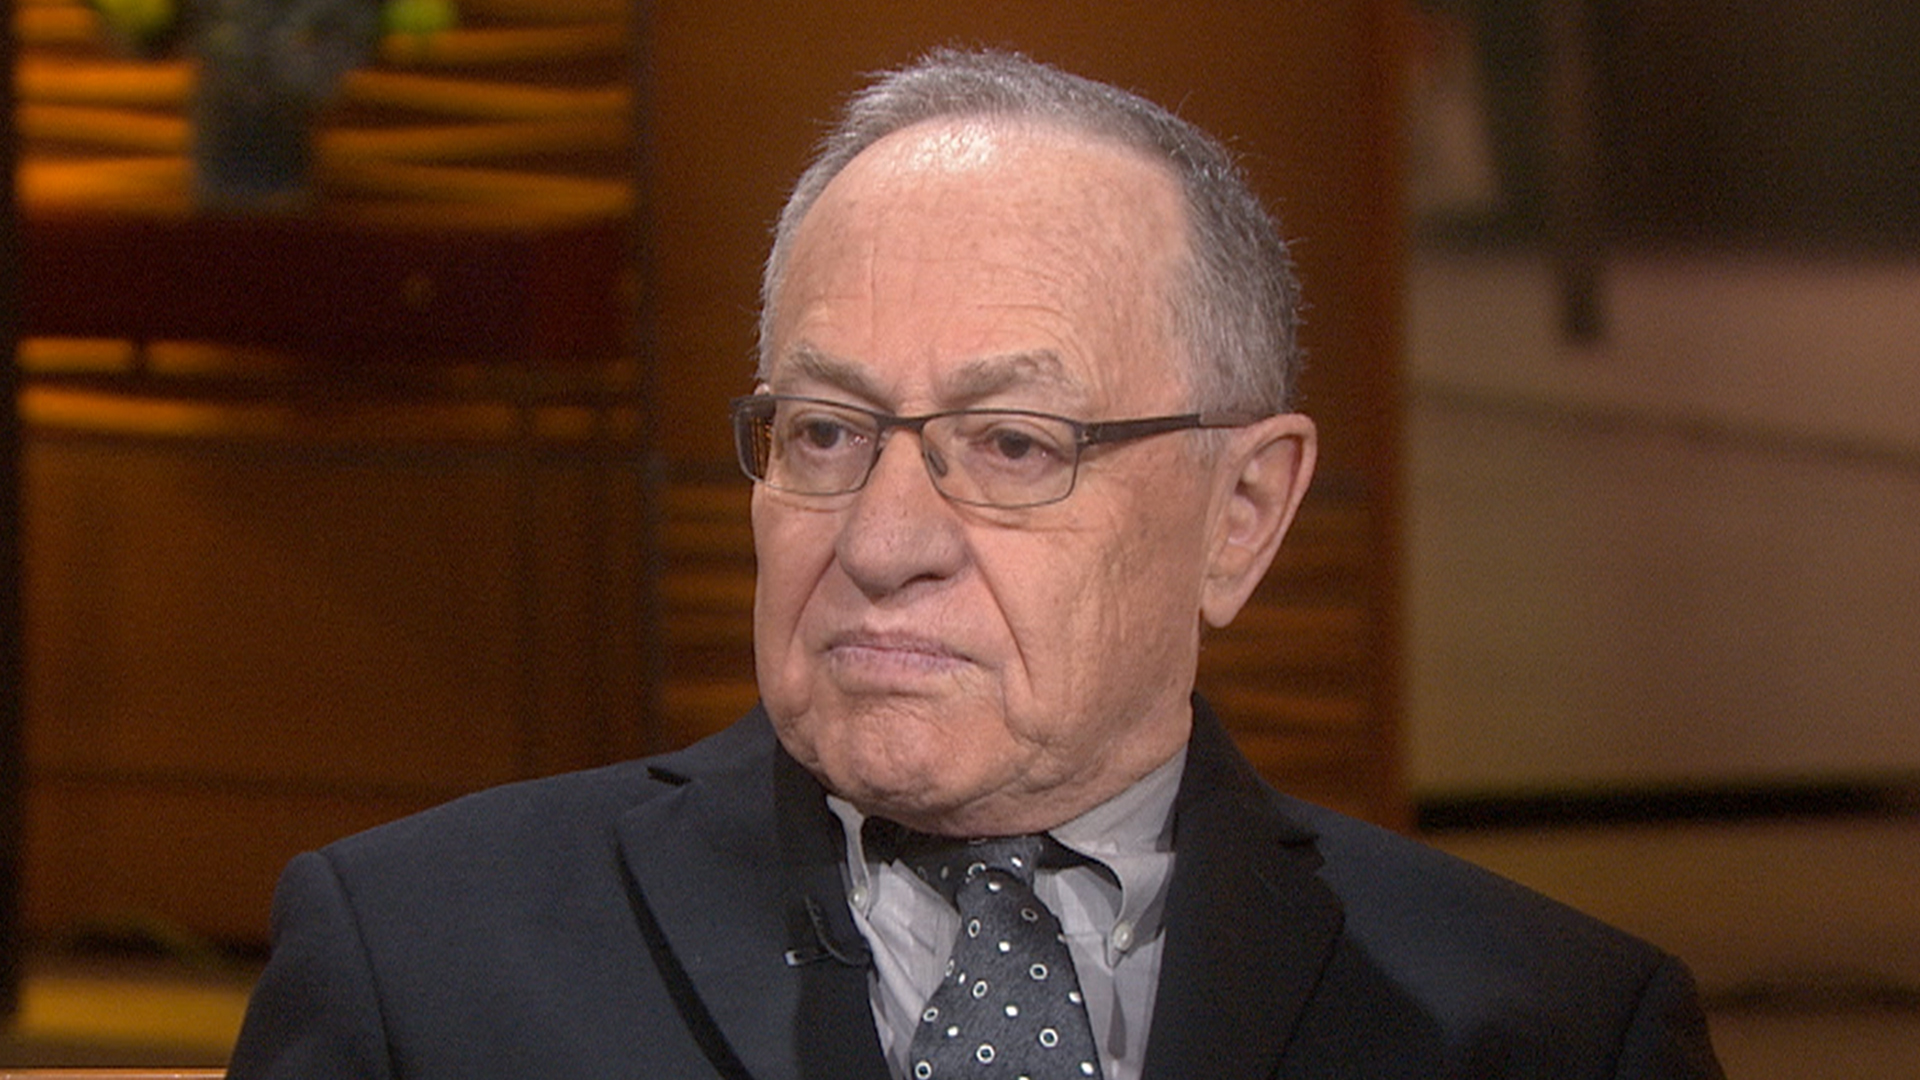 Alan Dershowitz: 'I feel completely, legally vindicated' by judge's ruling on sex ...1920 x 1080